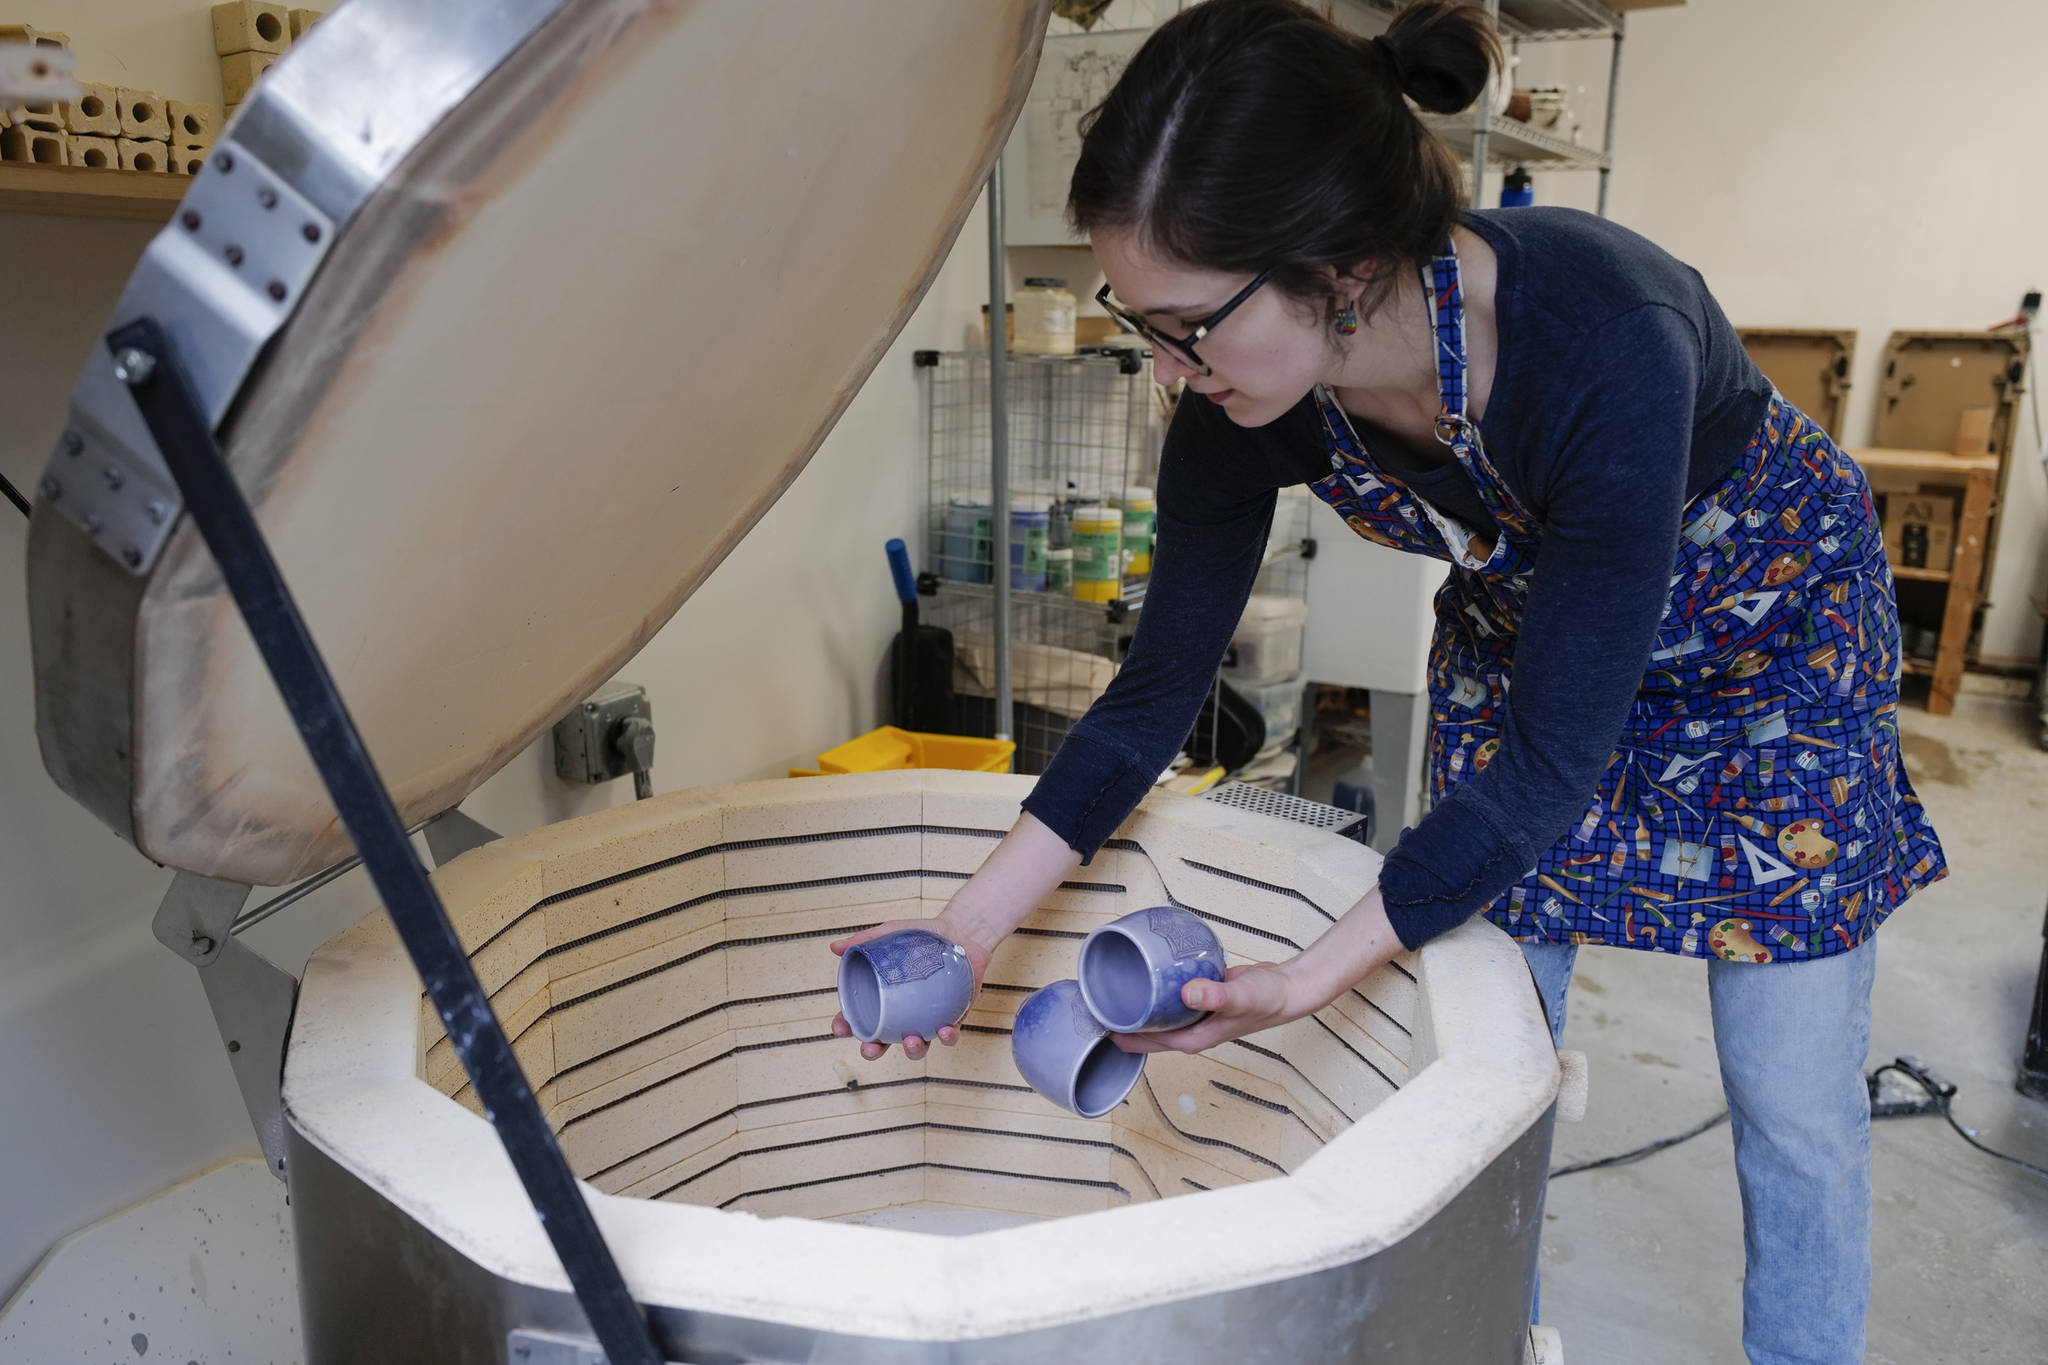 Mercedes Muñoz takes ceramic cups out of her home studio kiln on Monday, Oct. 28, 2019, as she prepares for a First Friday show at Coppa. (Michael Penn | Juneau Empire)